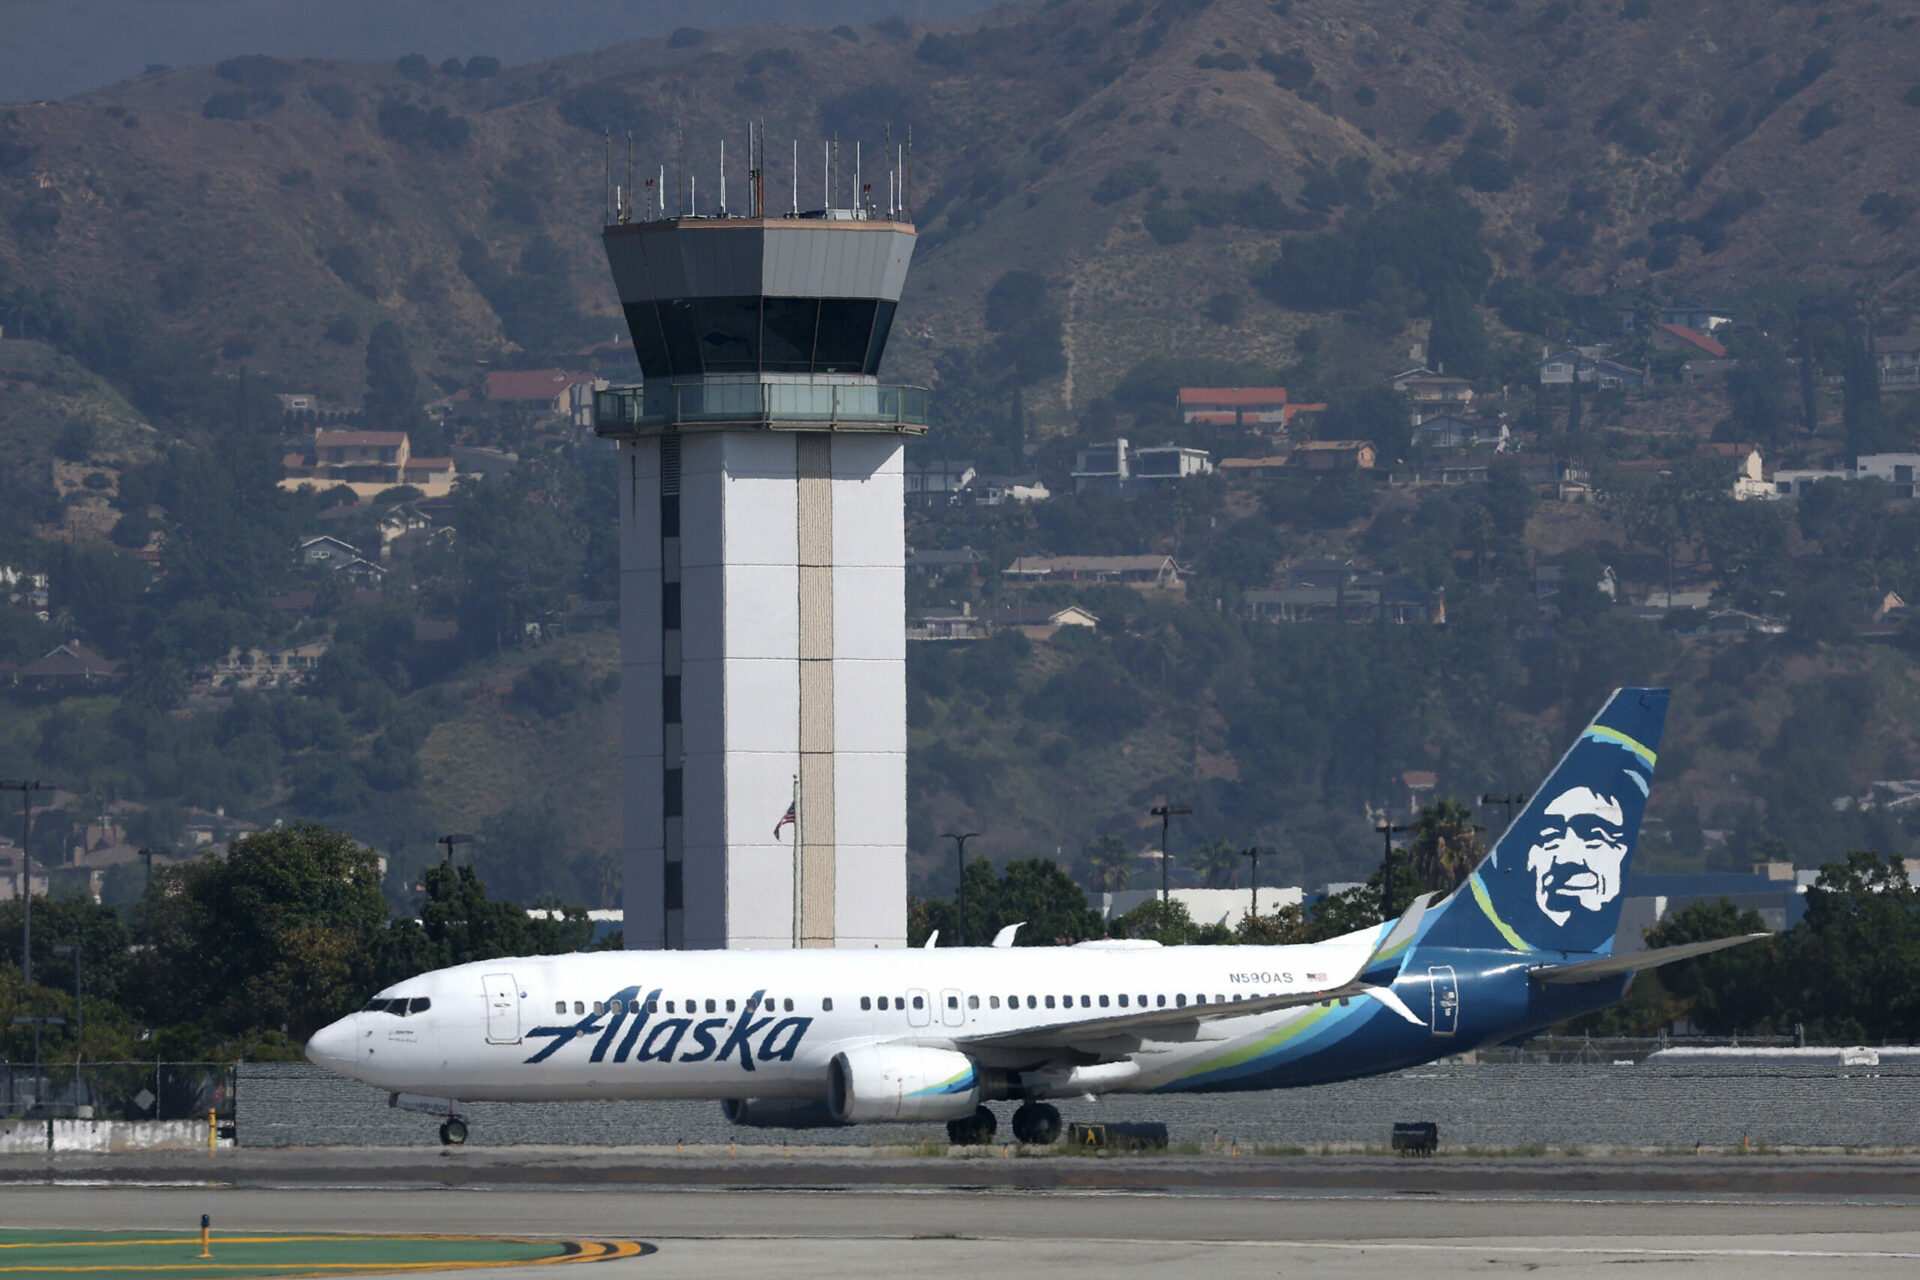 Off-duty Alaska Airlines pilot tried to shut off plane engines